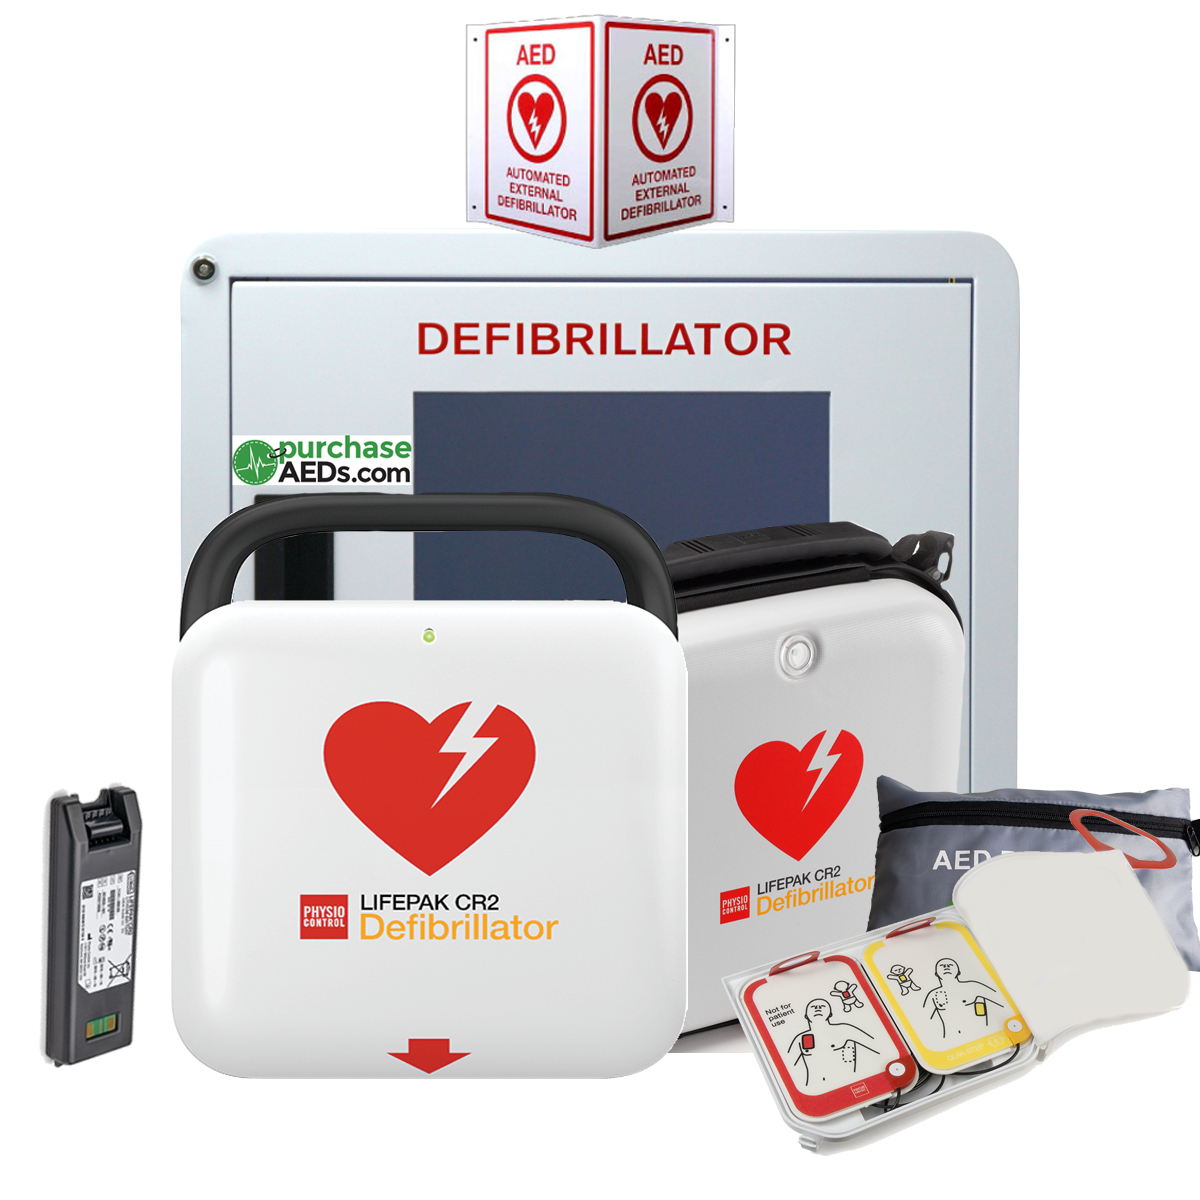 aed in cpr stands for